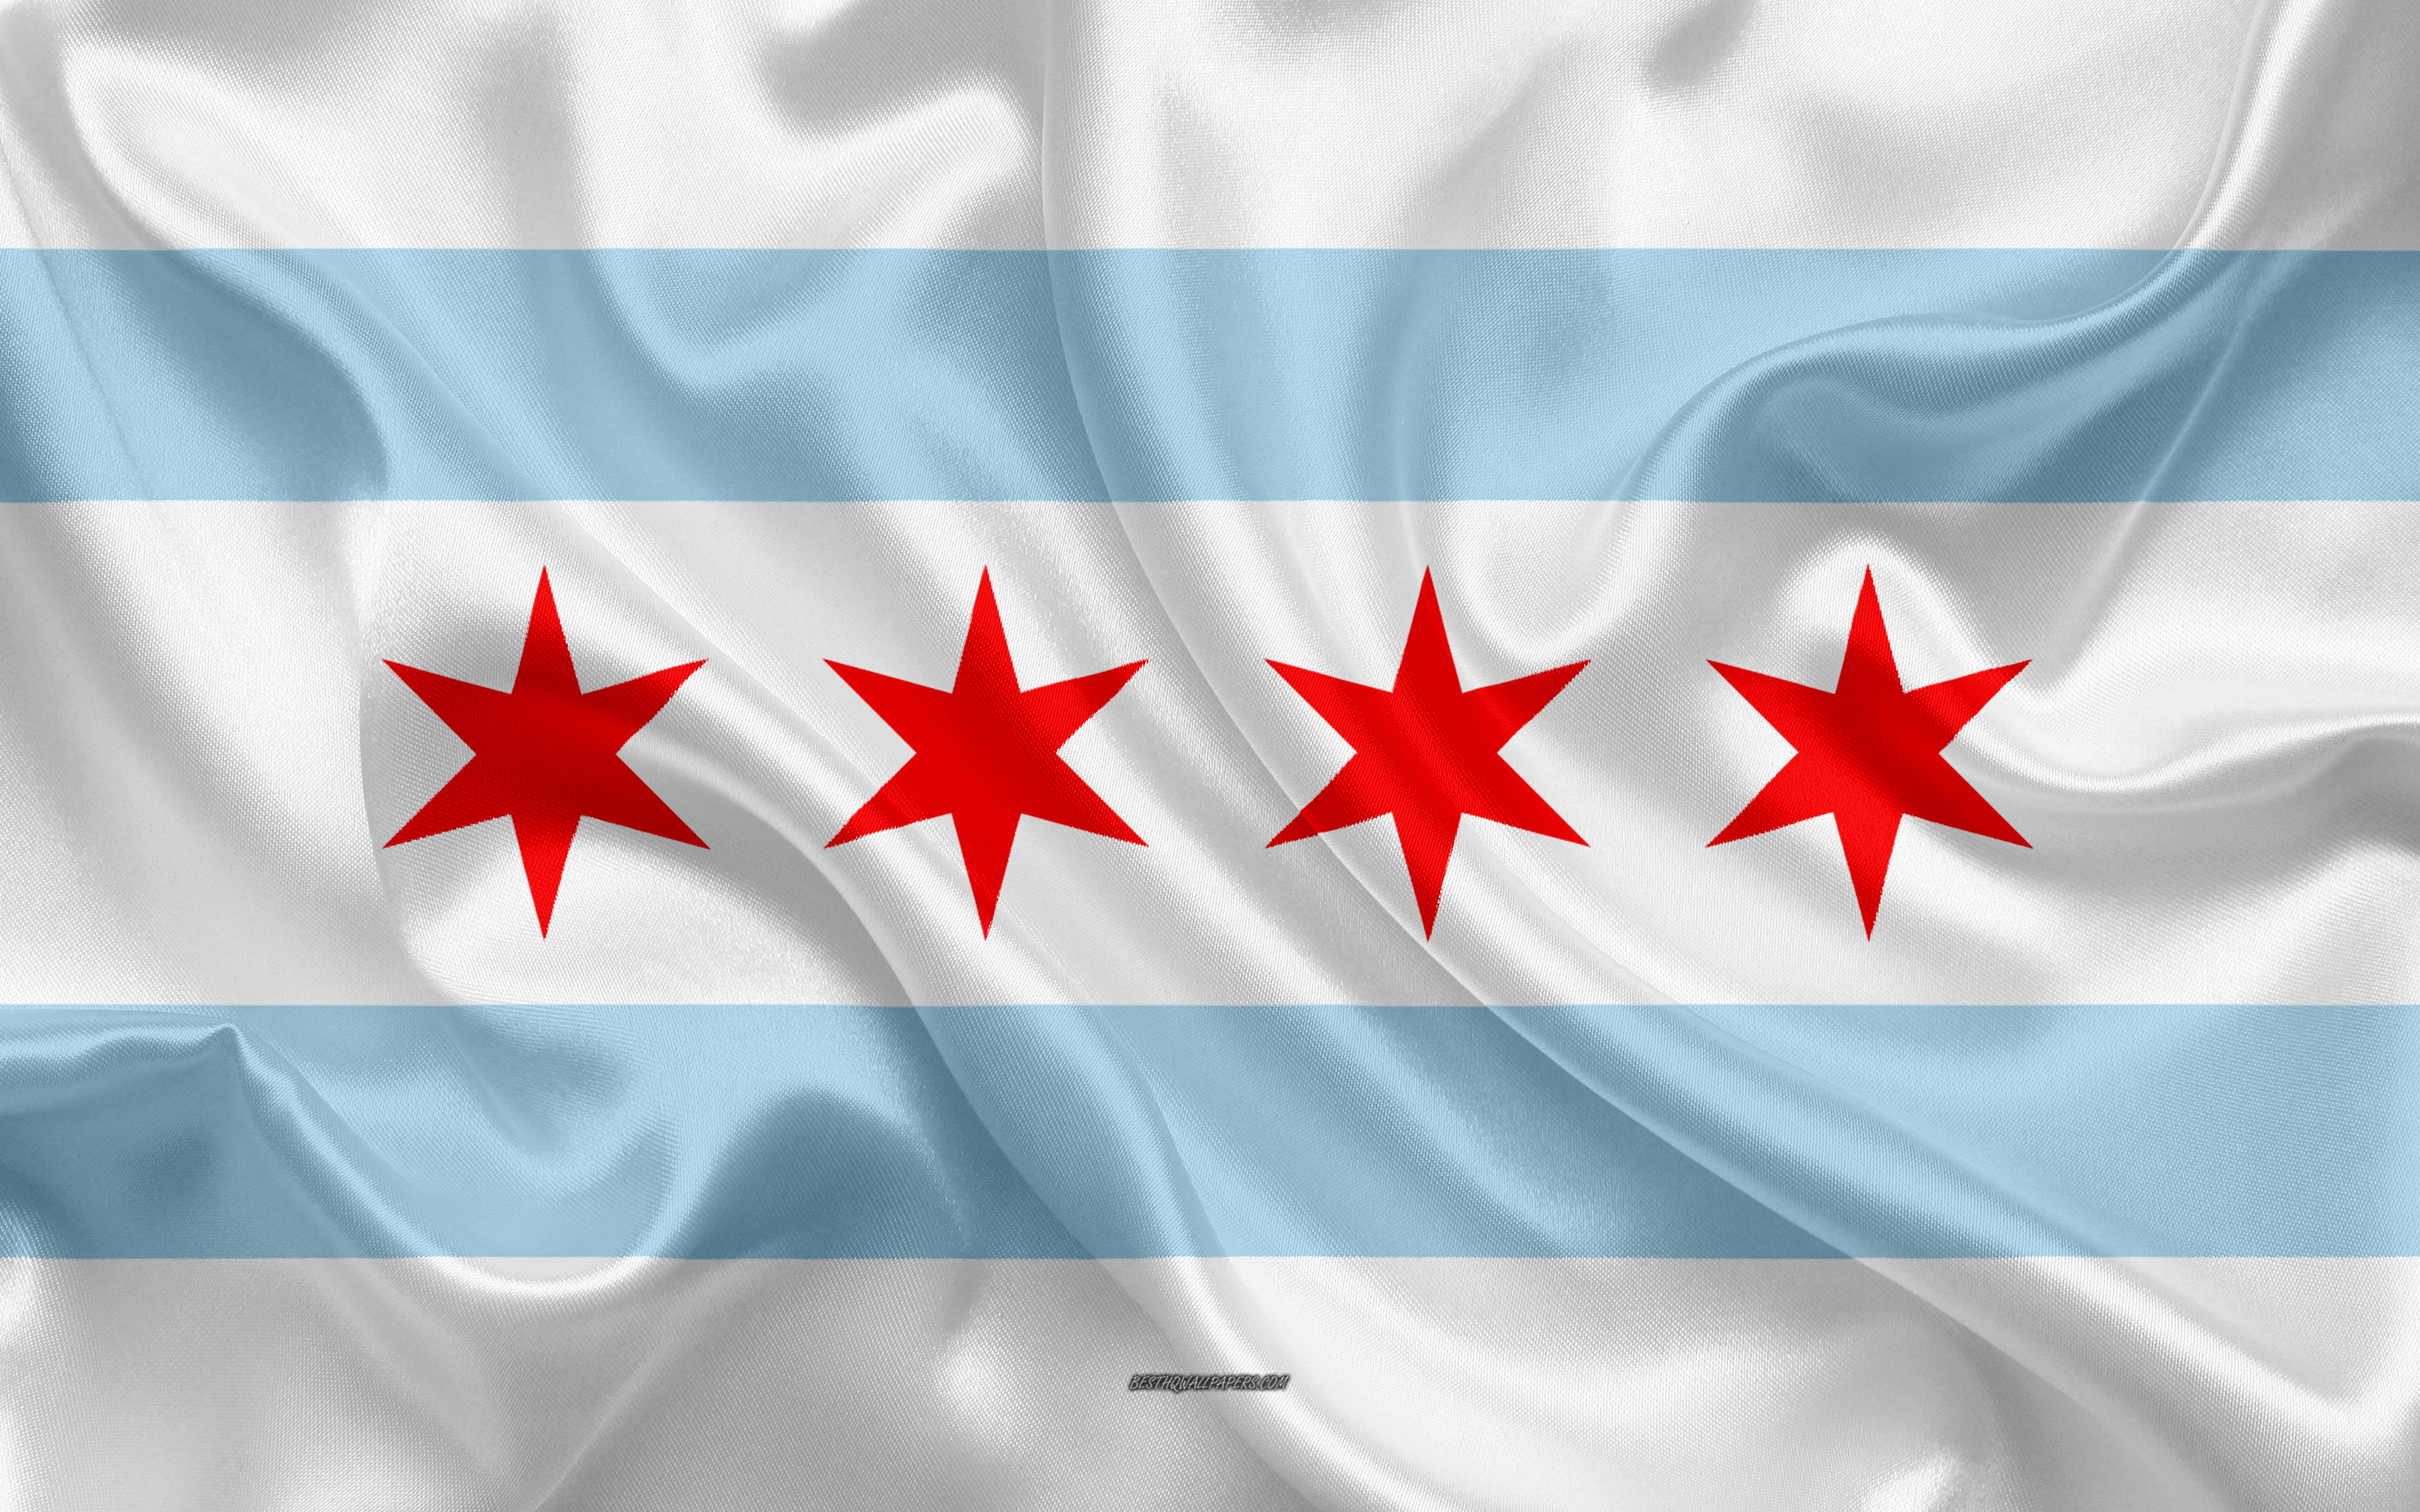 Download wallpaper Flag of Chicago, 4k, silk texture, american city, blue white silk flag, Chicago flag, Illinois, USA, art, United States of America, Chicago for desktop with resolution 3840x2400. High Quality HD